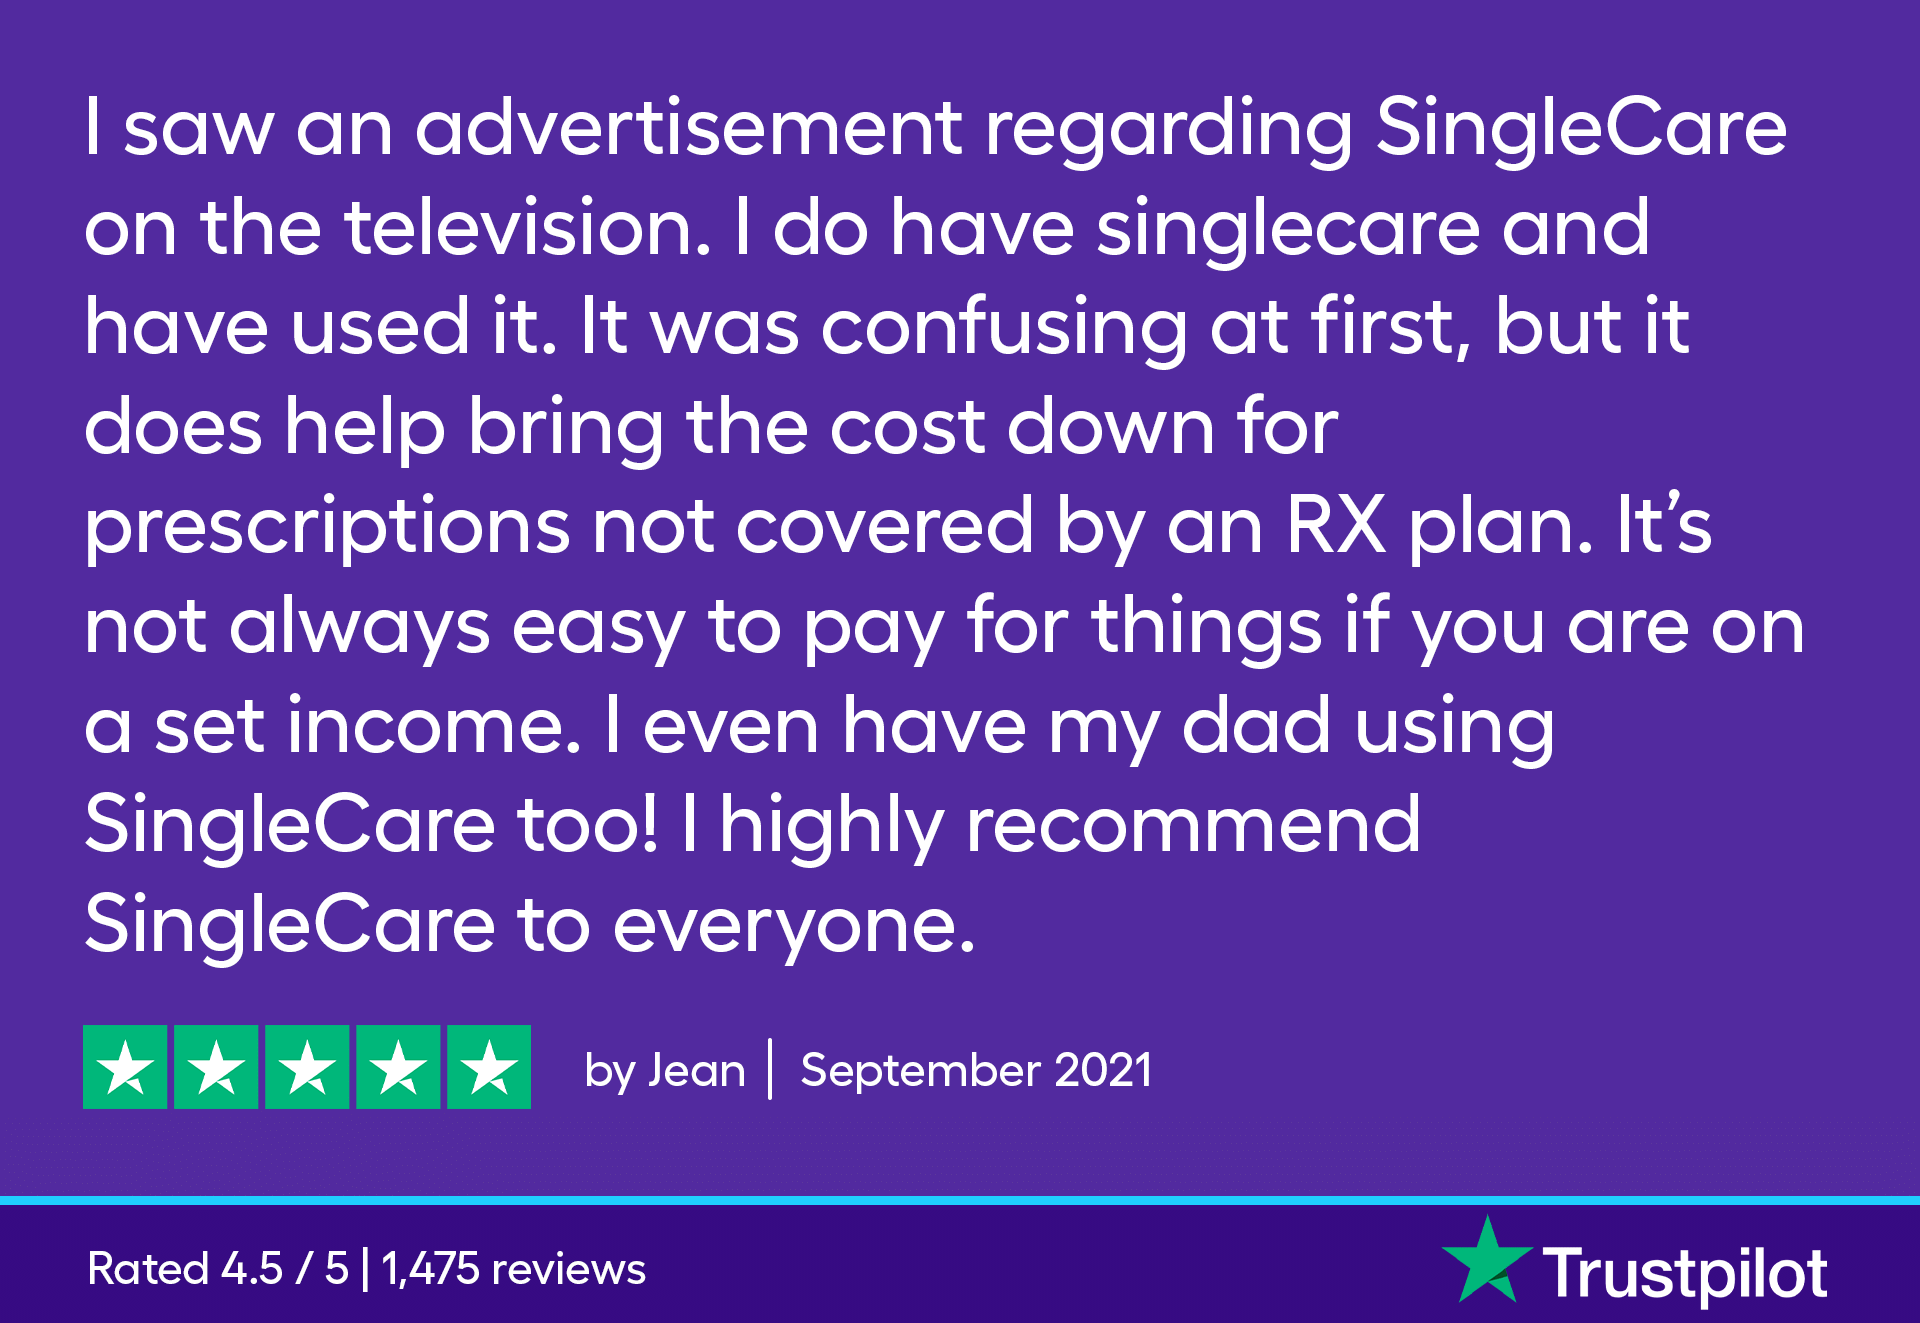 I saw an advertisement regarding SingleCare on the television. I do have singlecare and have used it. It was confusing at first, but it does help bring the cost down for prescriptions not covered by an Rx plan. It’s not always easy to pay for things if you are on a set income. I even have my dad using SingleCare too! I highly recommend SingleCare to everyone. 